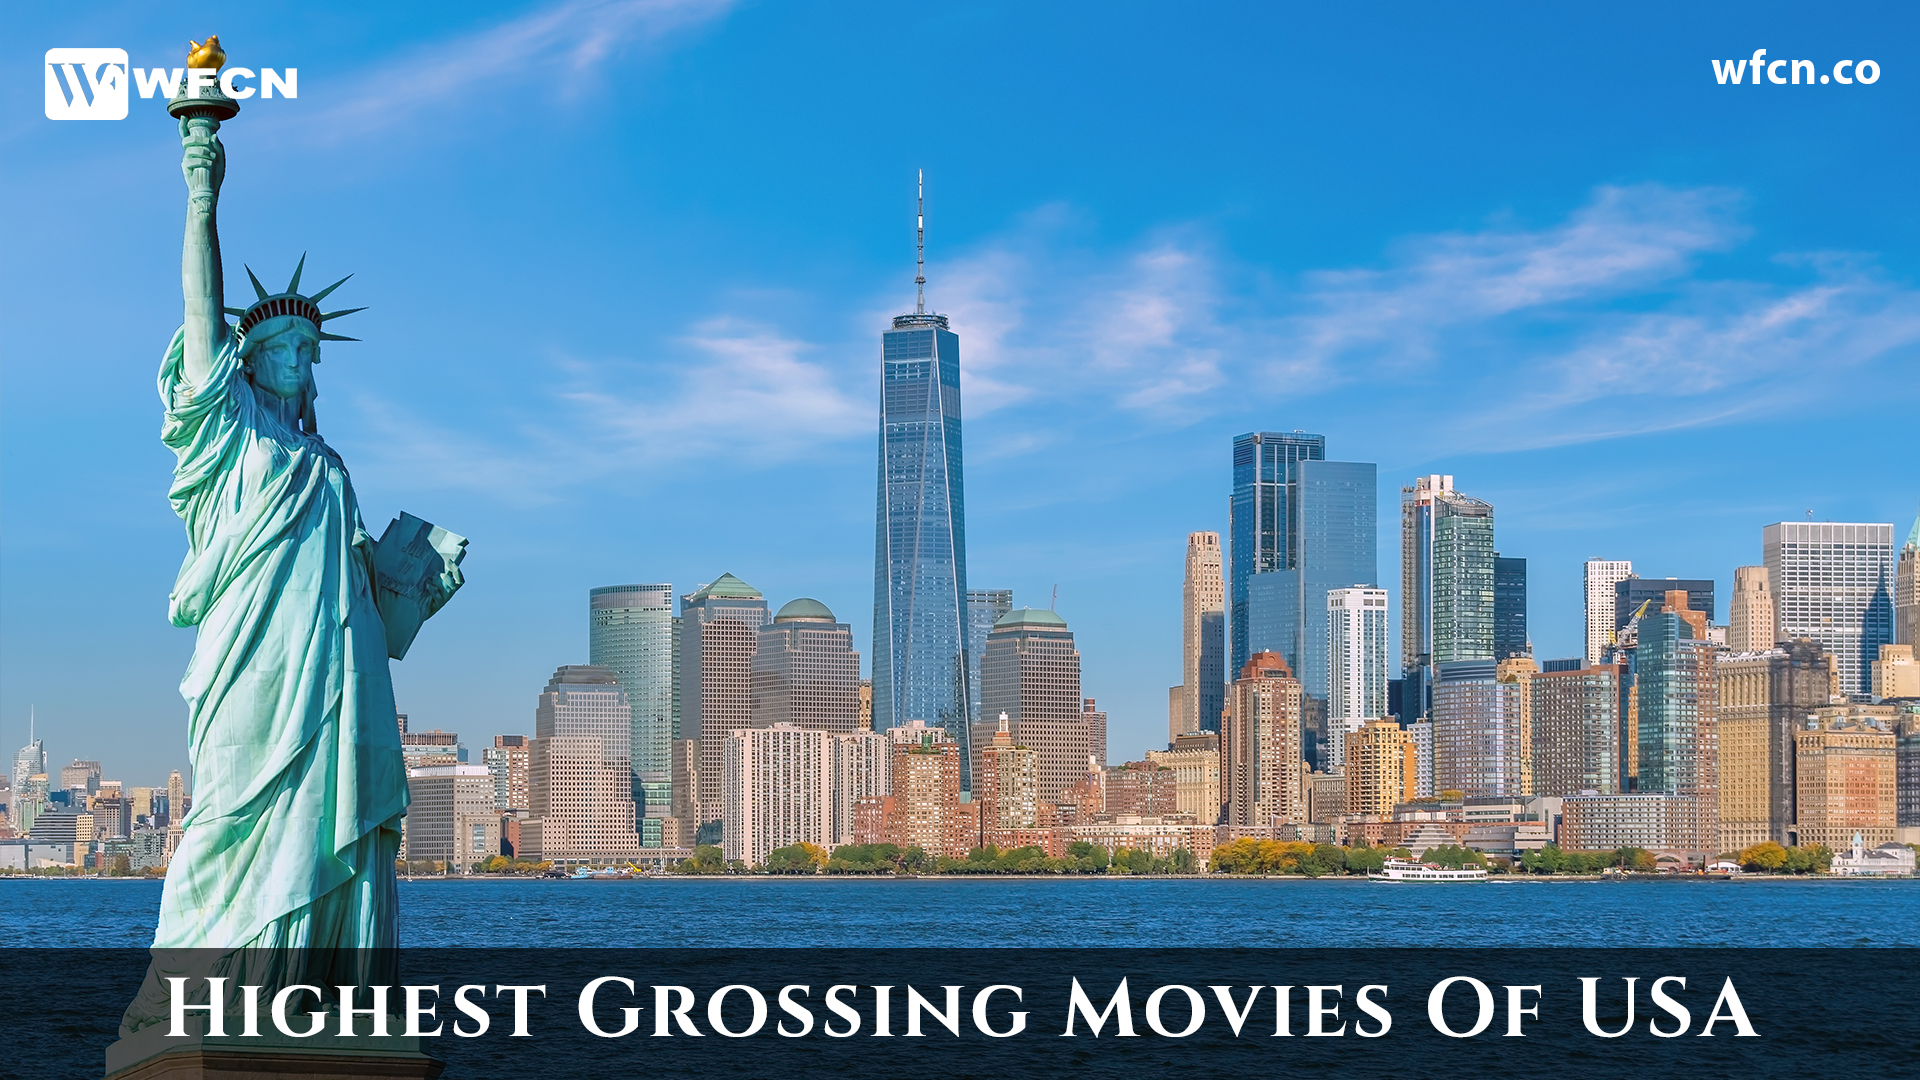 Most Popular Movies of The United States